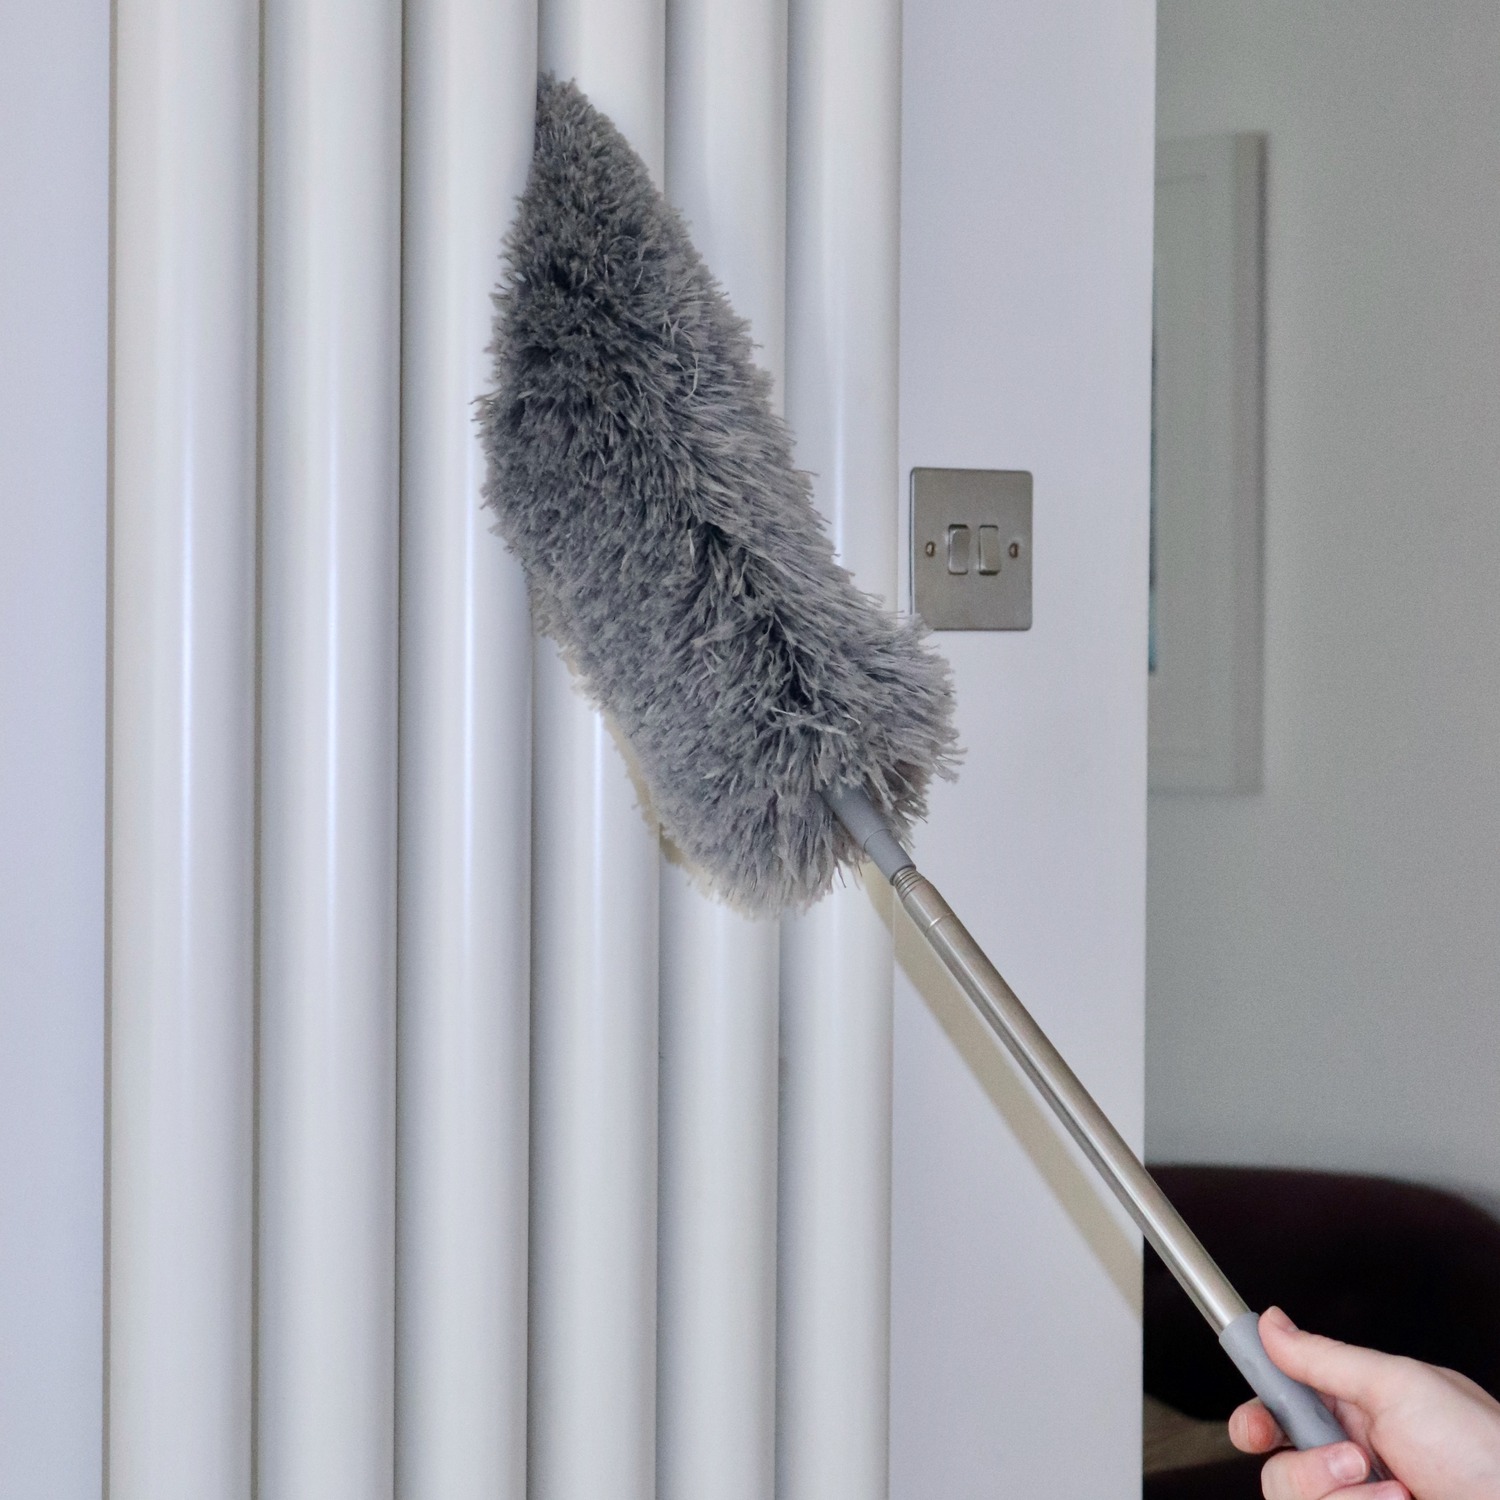 How To Clean A Microfiber Duster